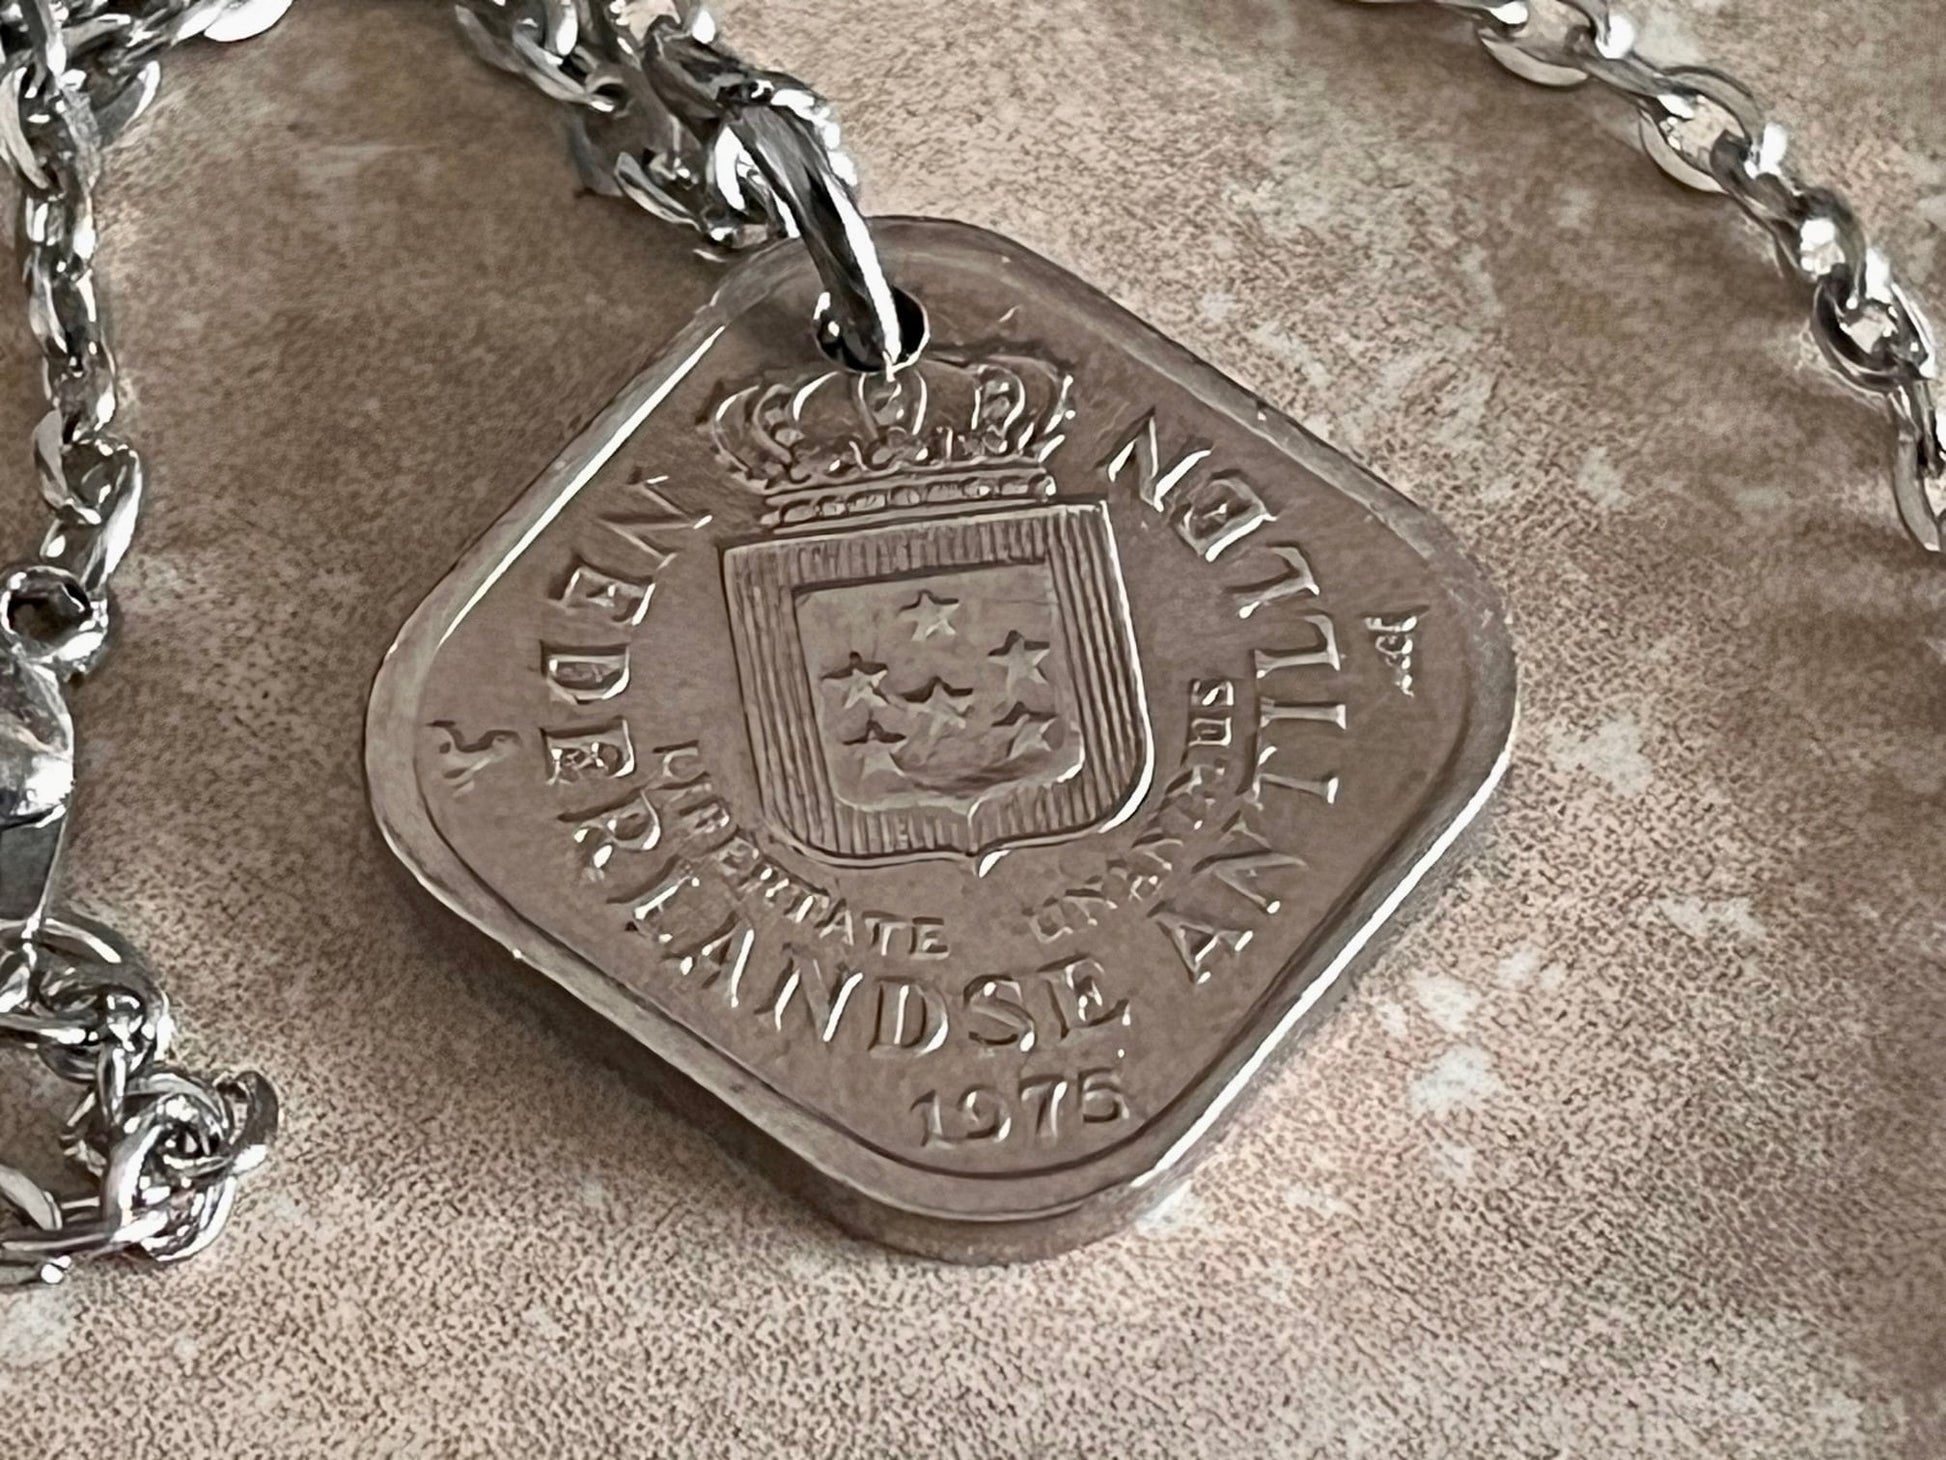 Netherlands Antillen Coin Necklace 5 Cents Pendant Personal Old Vintage Handmade Jewelry Gift Friend Charm For Him Her World Coin Collector